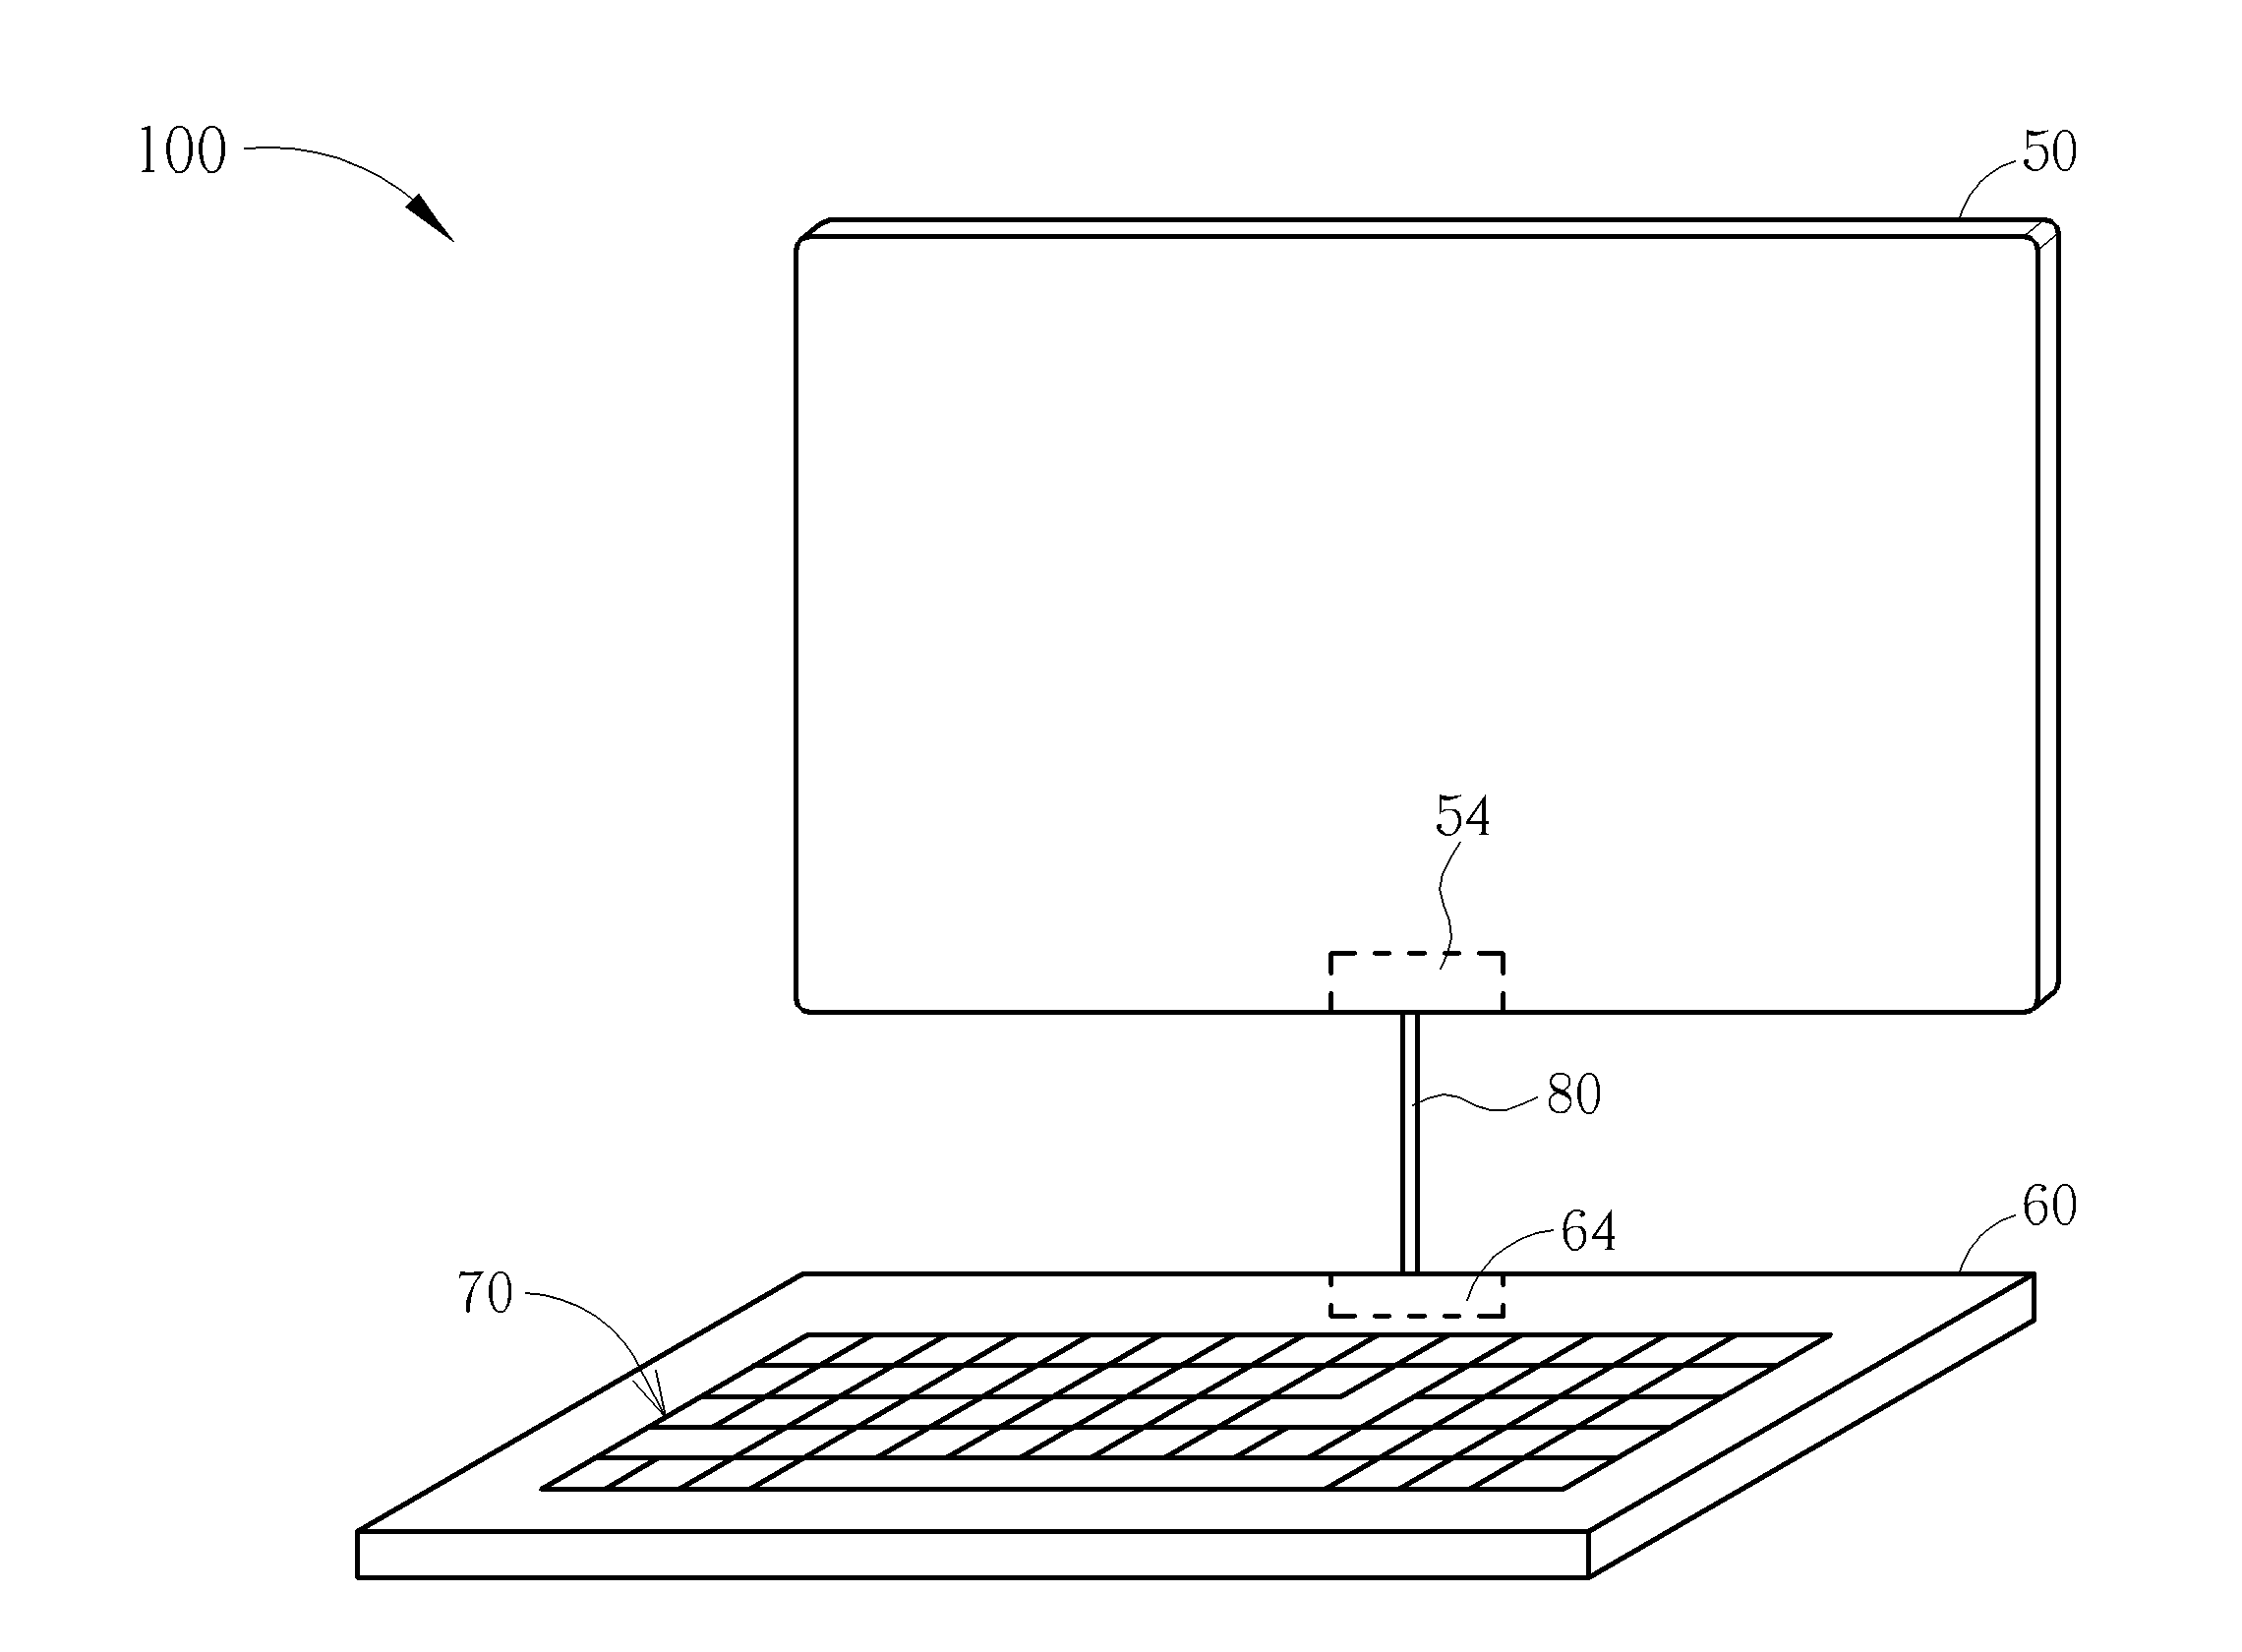 Display system having electrophoretic touch panel